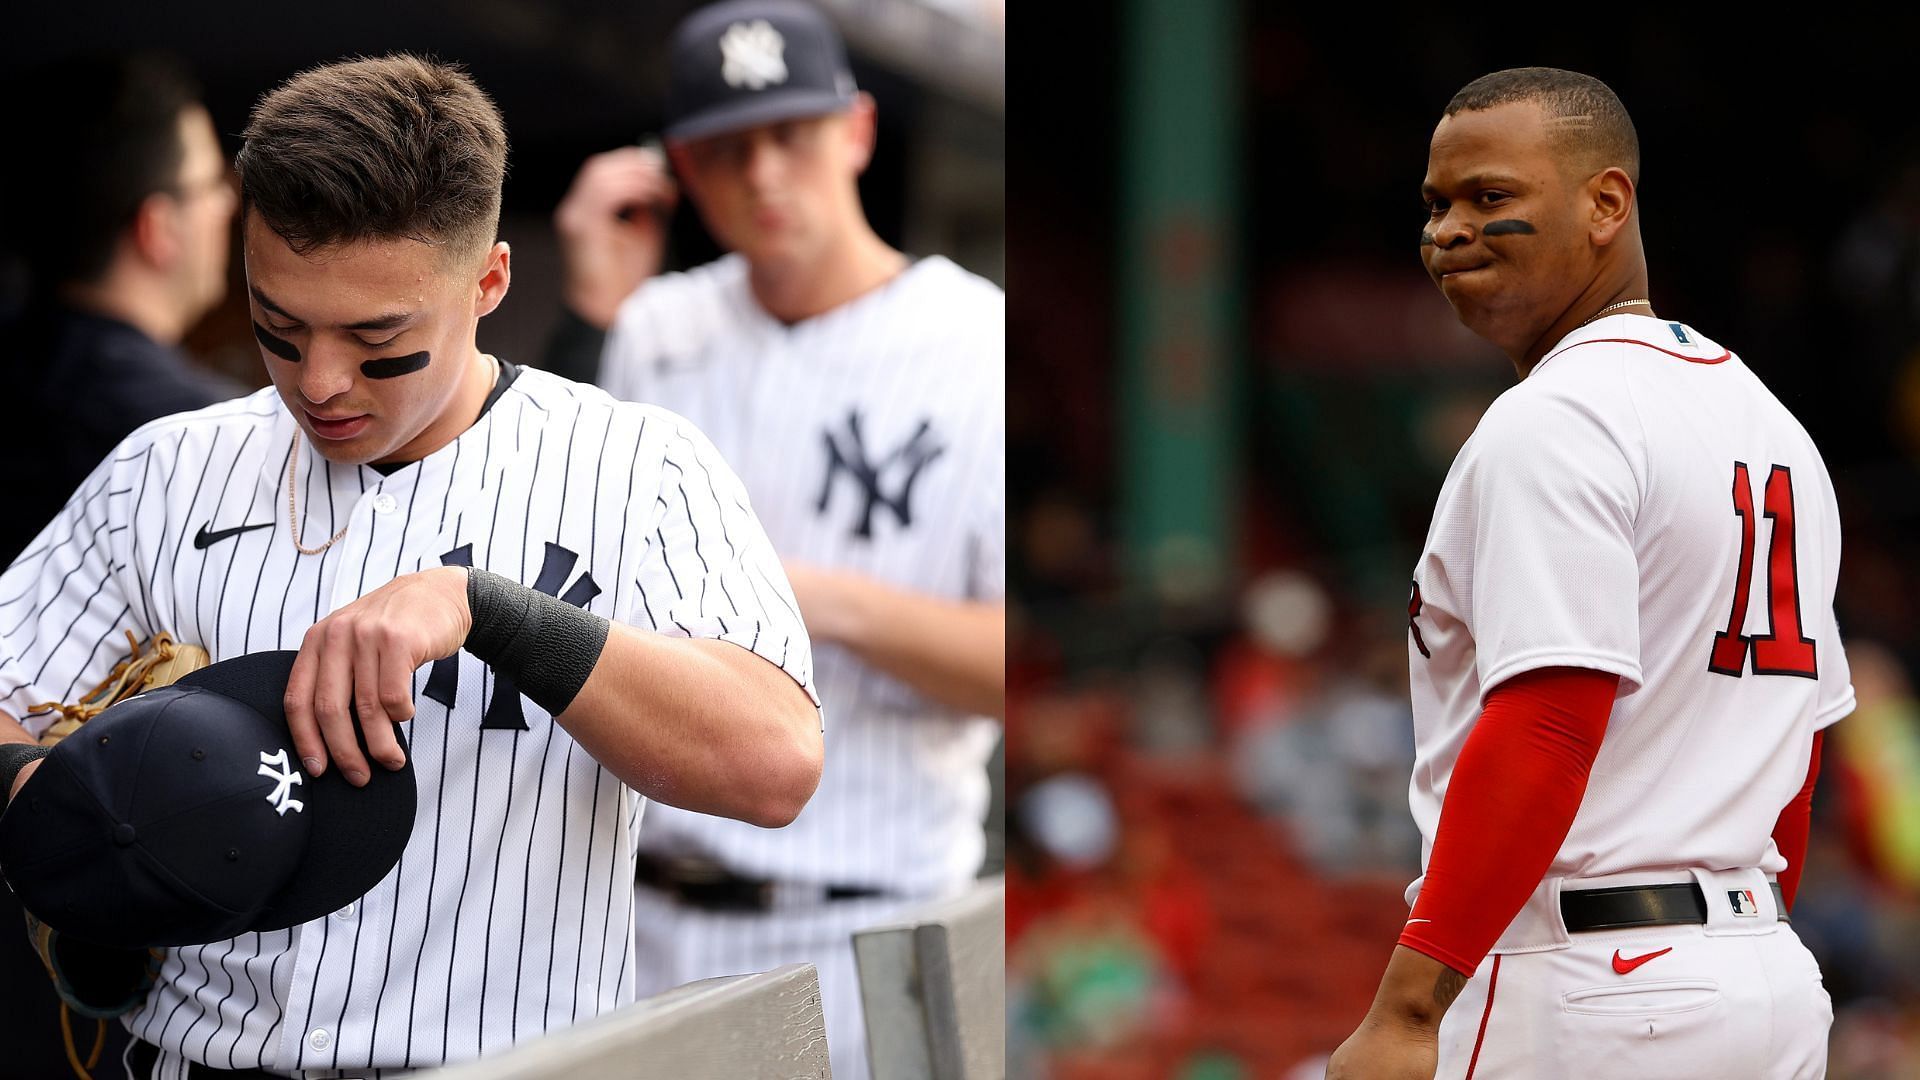 The New York Yankees and Boston Red Sox are having trouble keeping their &quot;rivalry&quot; alive